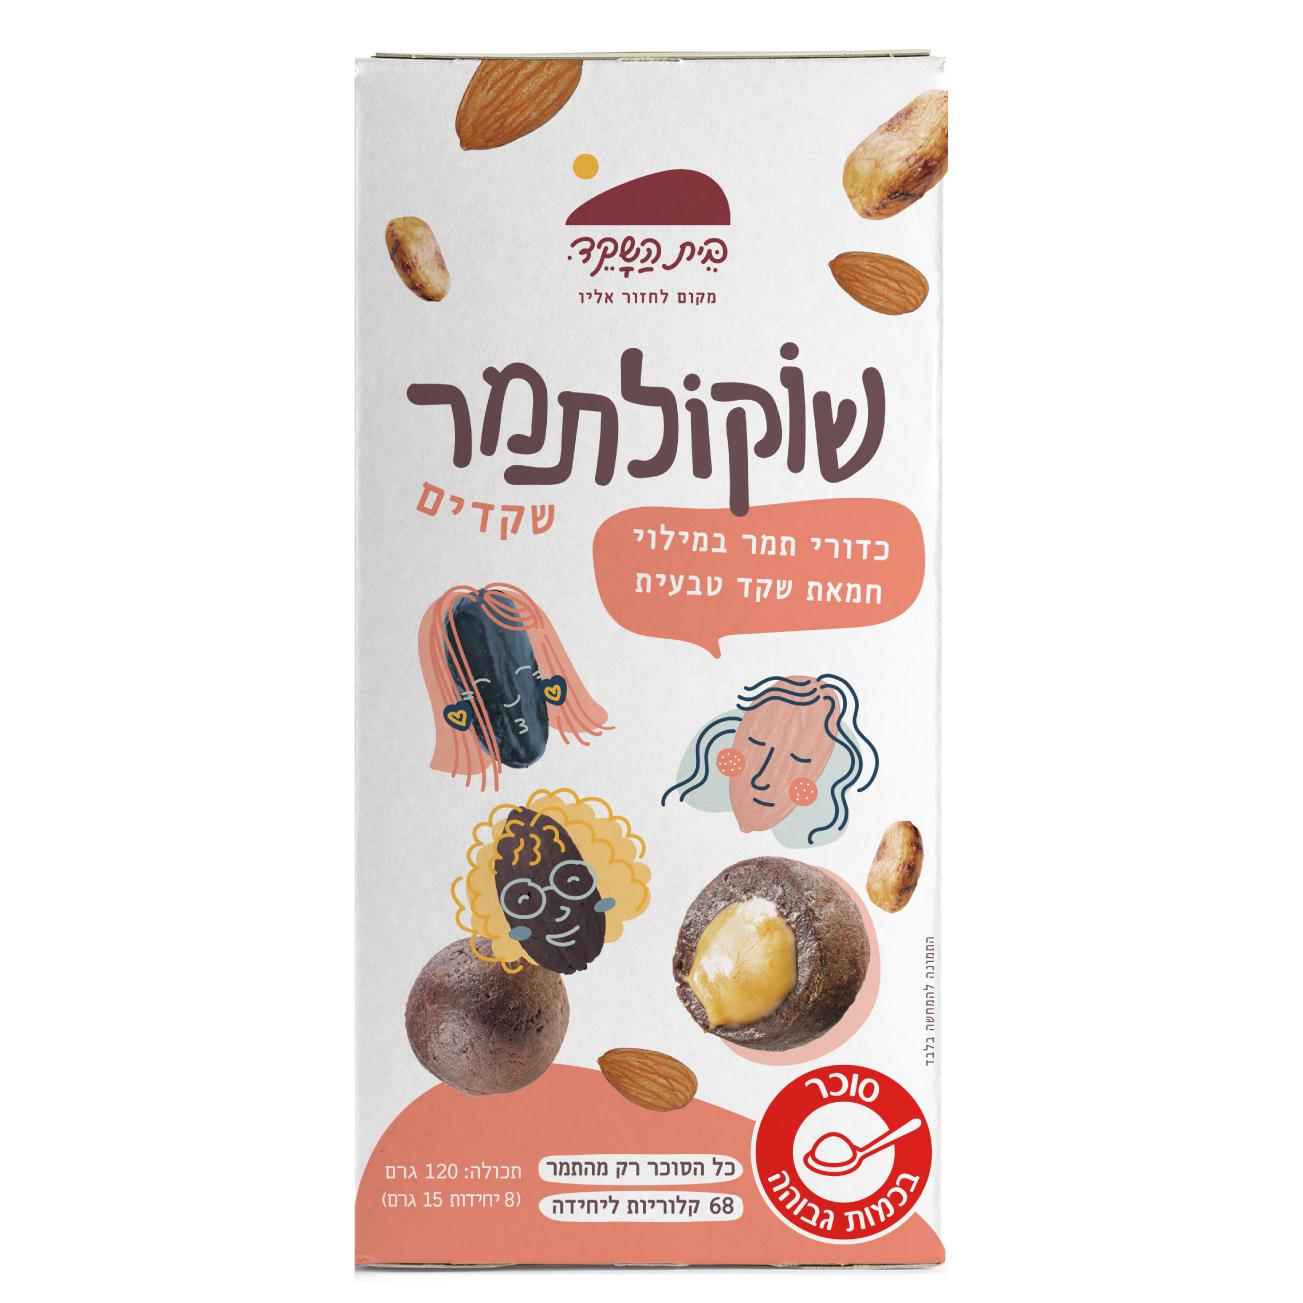 Date chocolate filled with almond butter - Beit Hashaked - Israel Menu